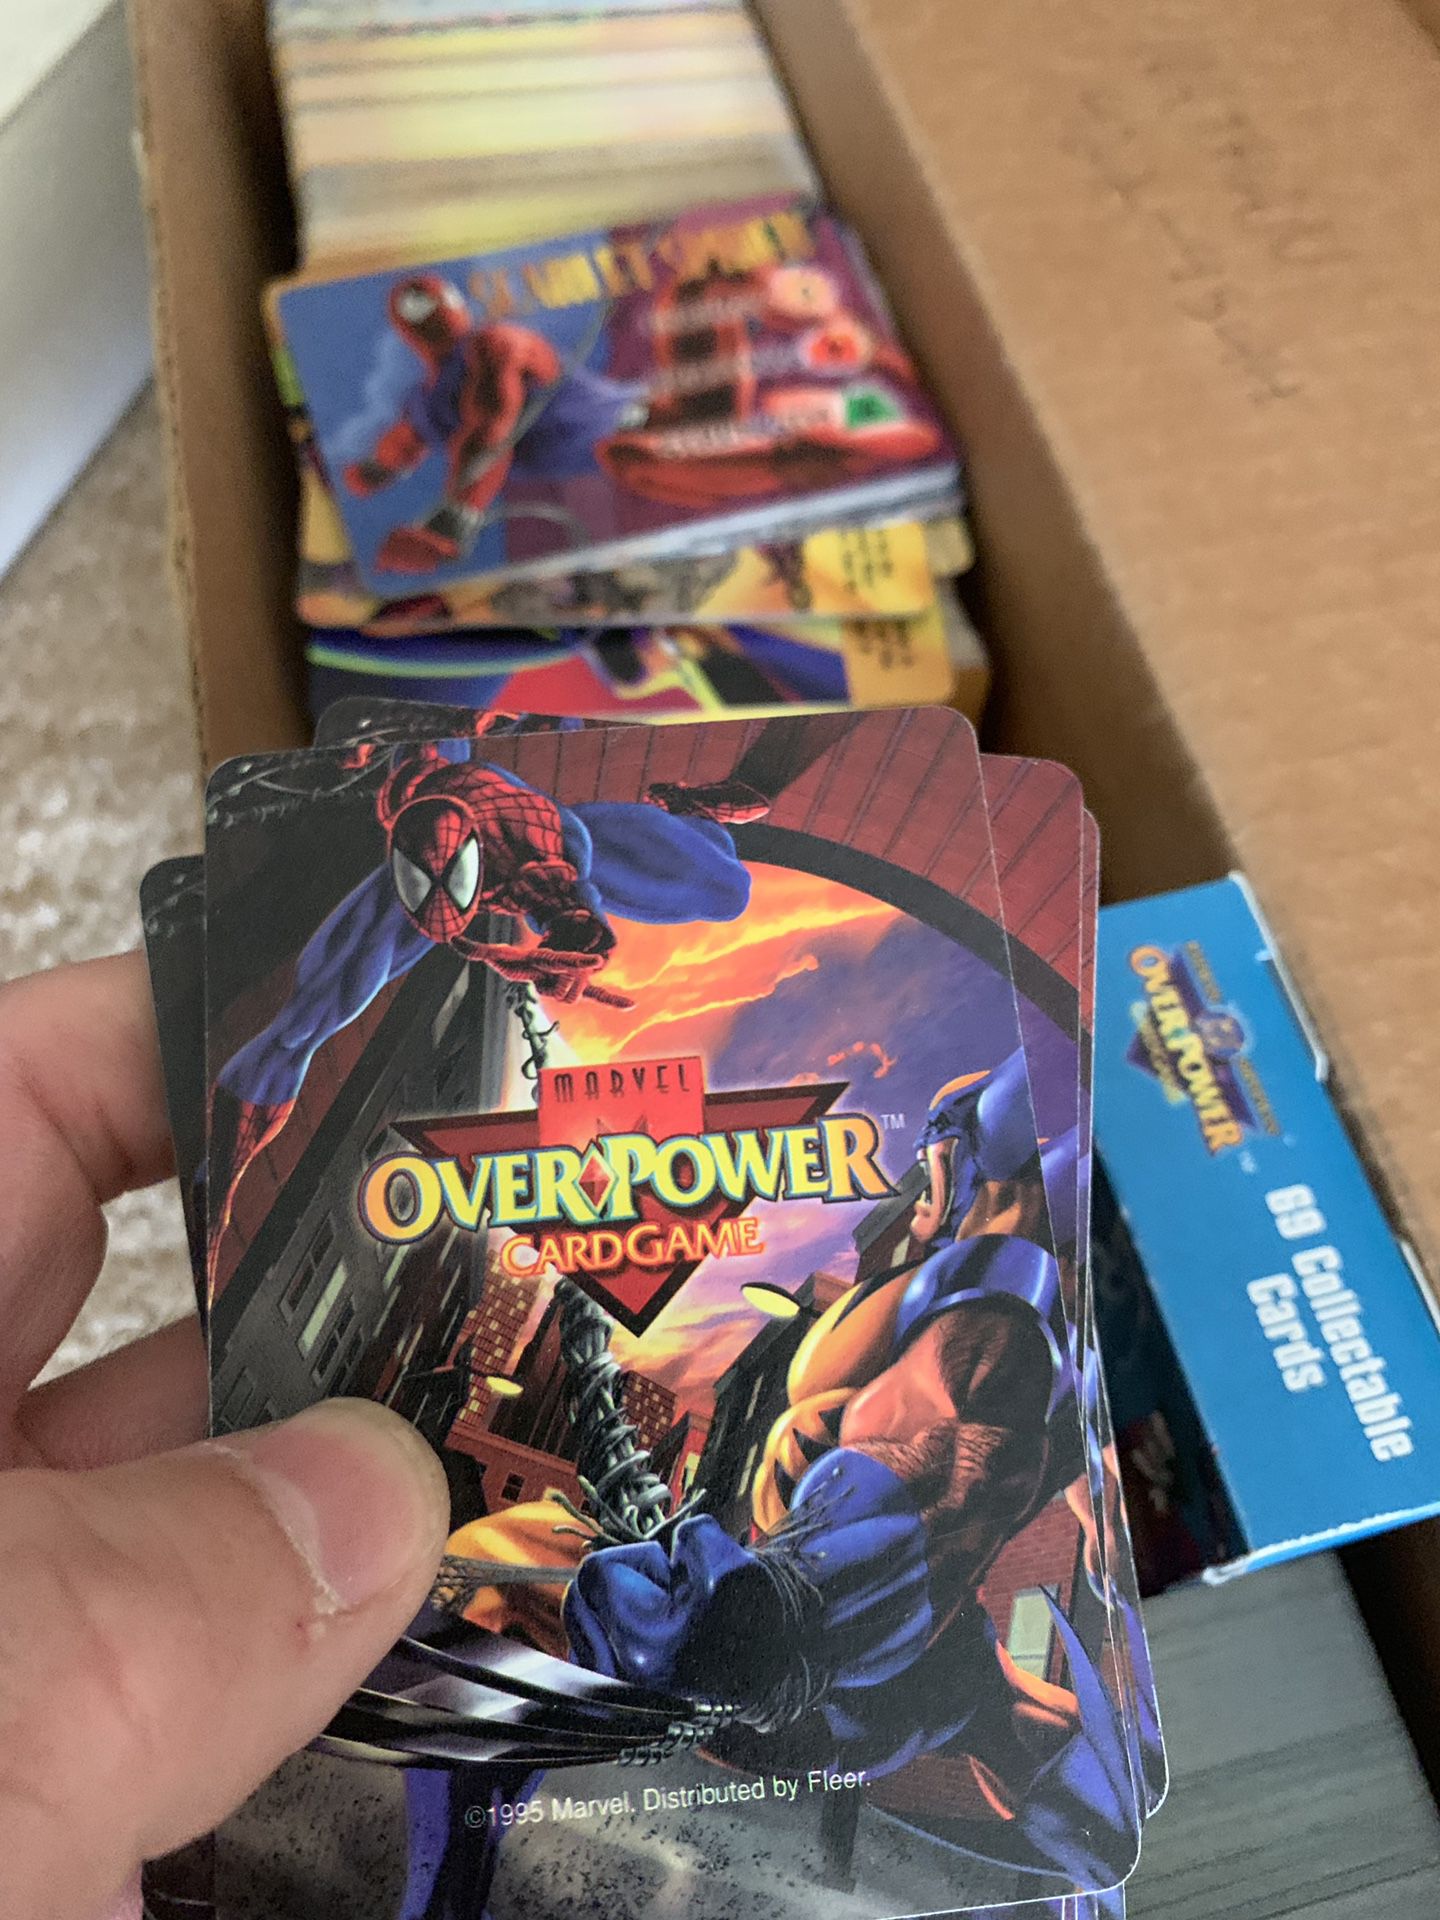 Over power board game cards